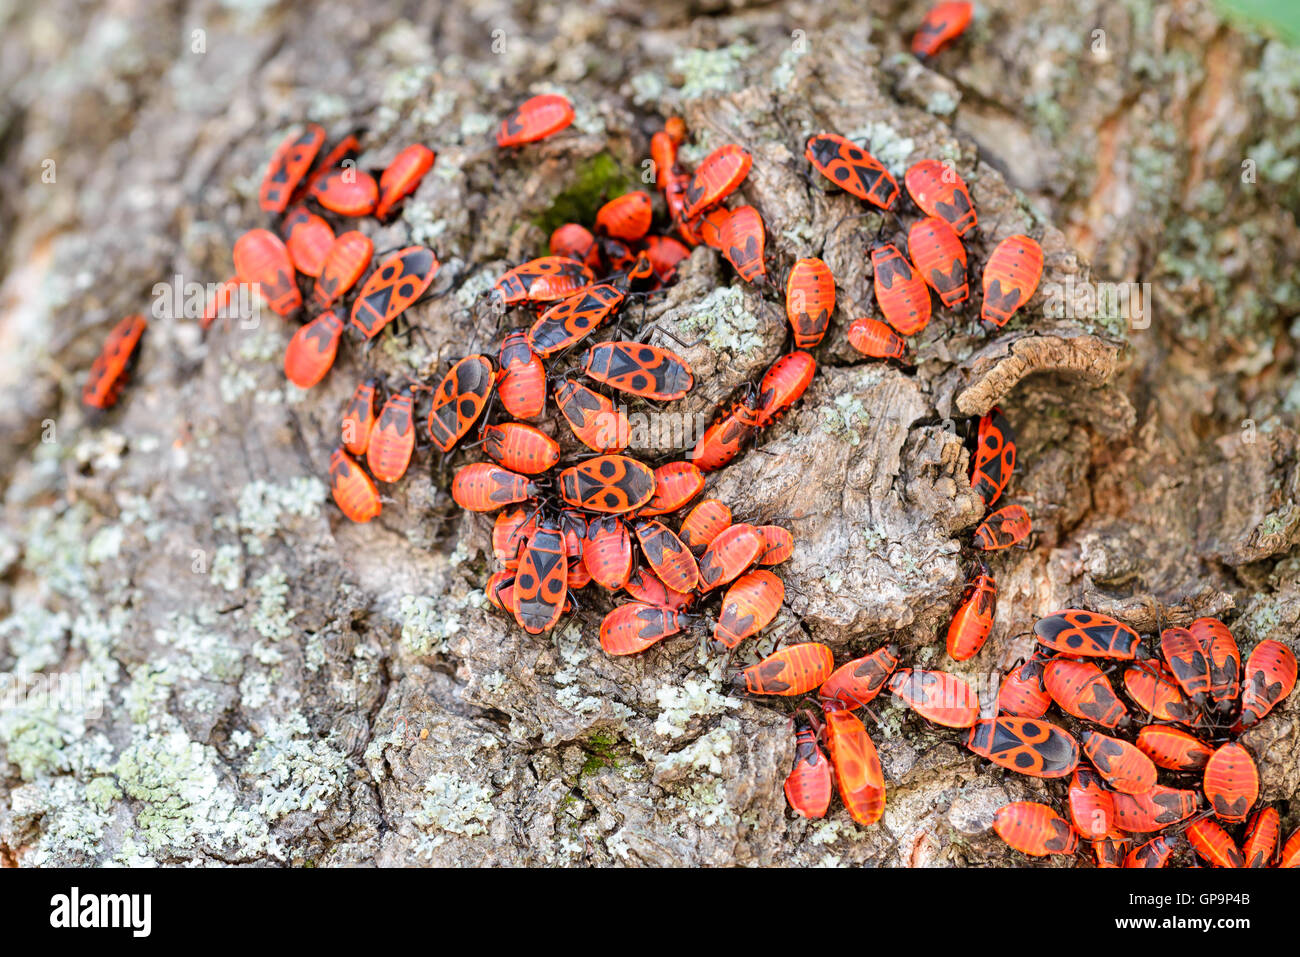 Colony of black and red Firebug or Pyrrhocoris apterus, adults and nymphs, on a tree trunk Stock Photo